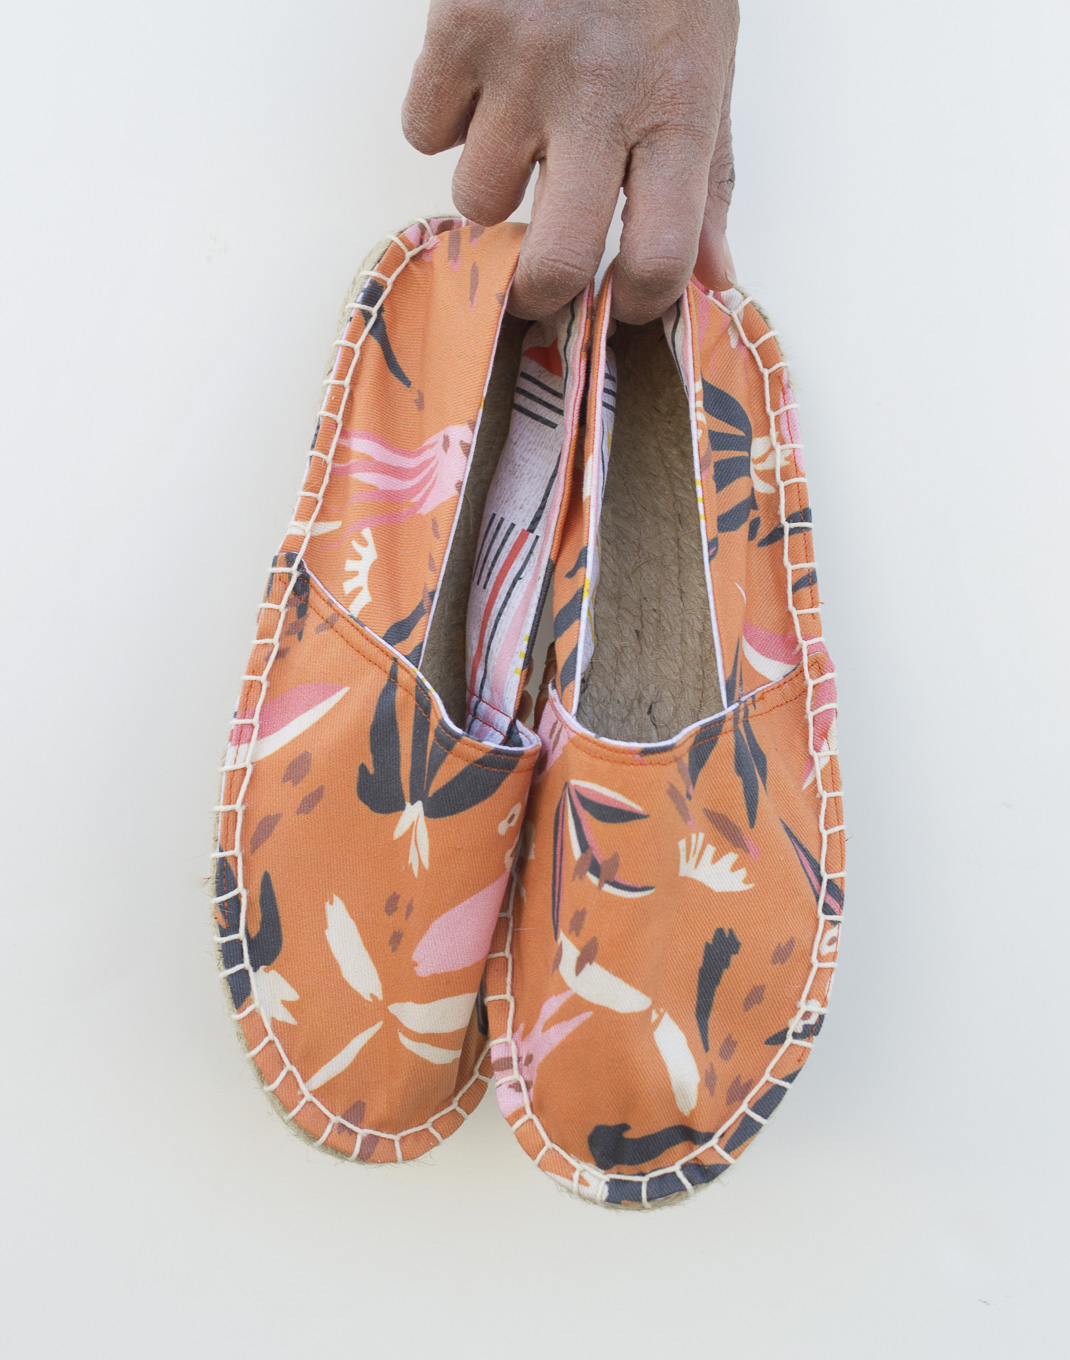 4 Tips For Making Your Own Pair of Espadrilles with Spoonflower Fabric | Spoonflower Blog 